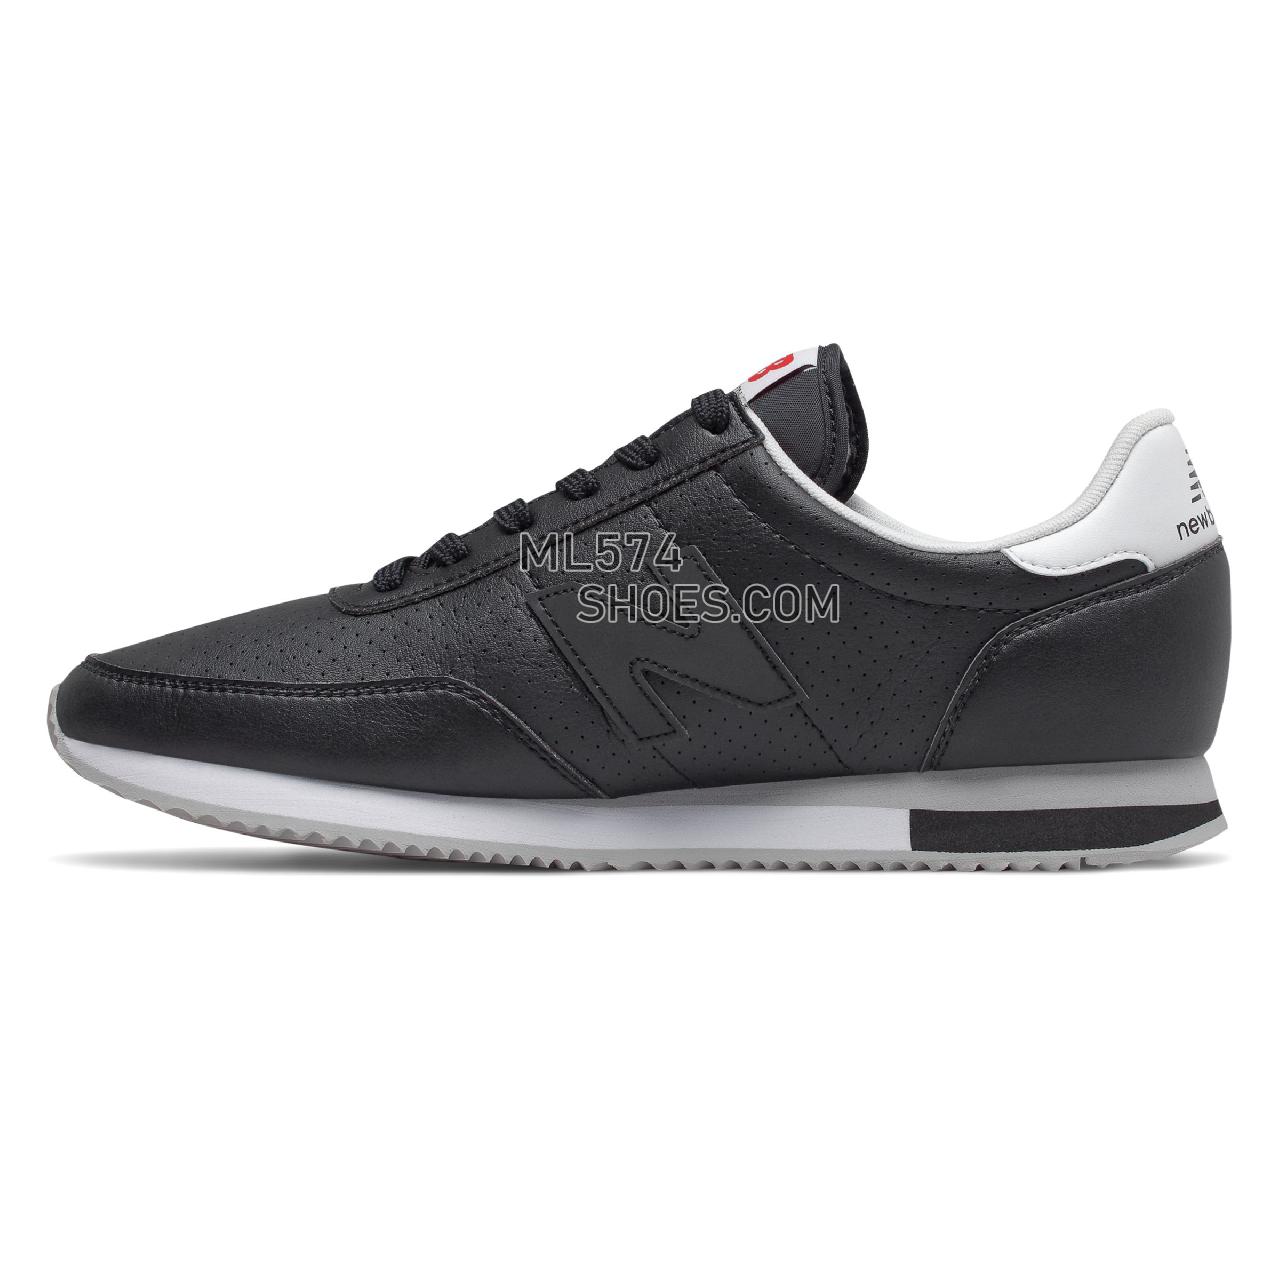 New Balance 720 - Men's Classic Sneakers - Black with Team Red - UL720CA